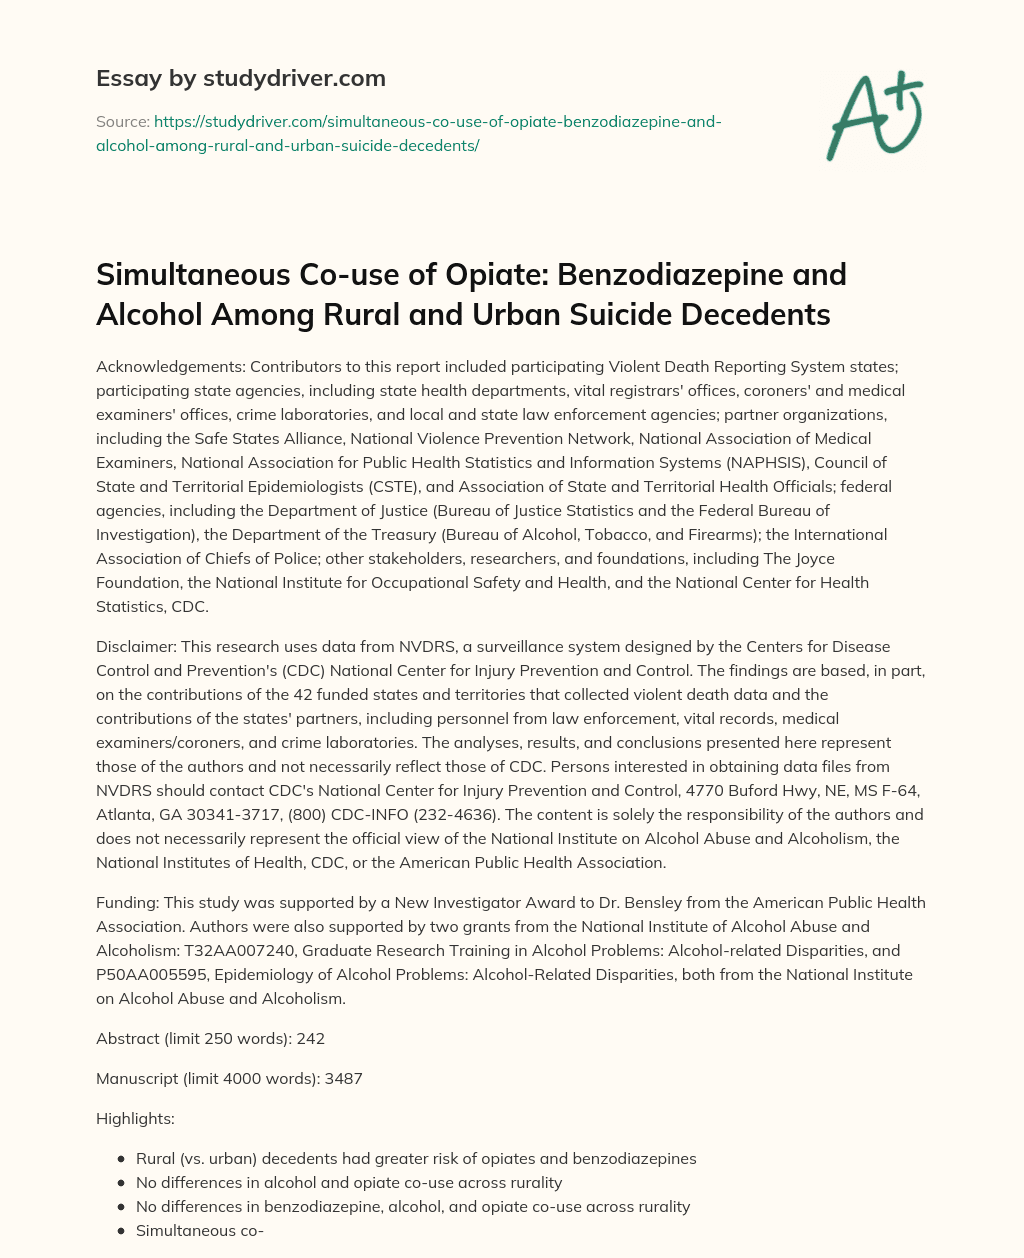 Simultaneous Co-use of Opiate: Benzodiazepine and Alcohol Among Rural and Urban Suicide Decedents essay